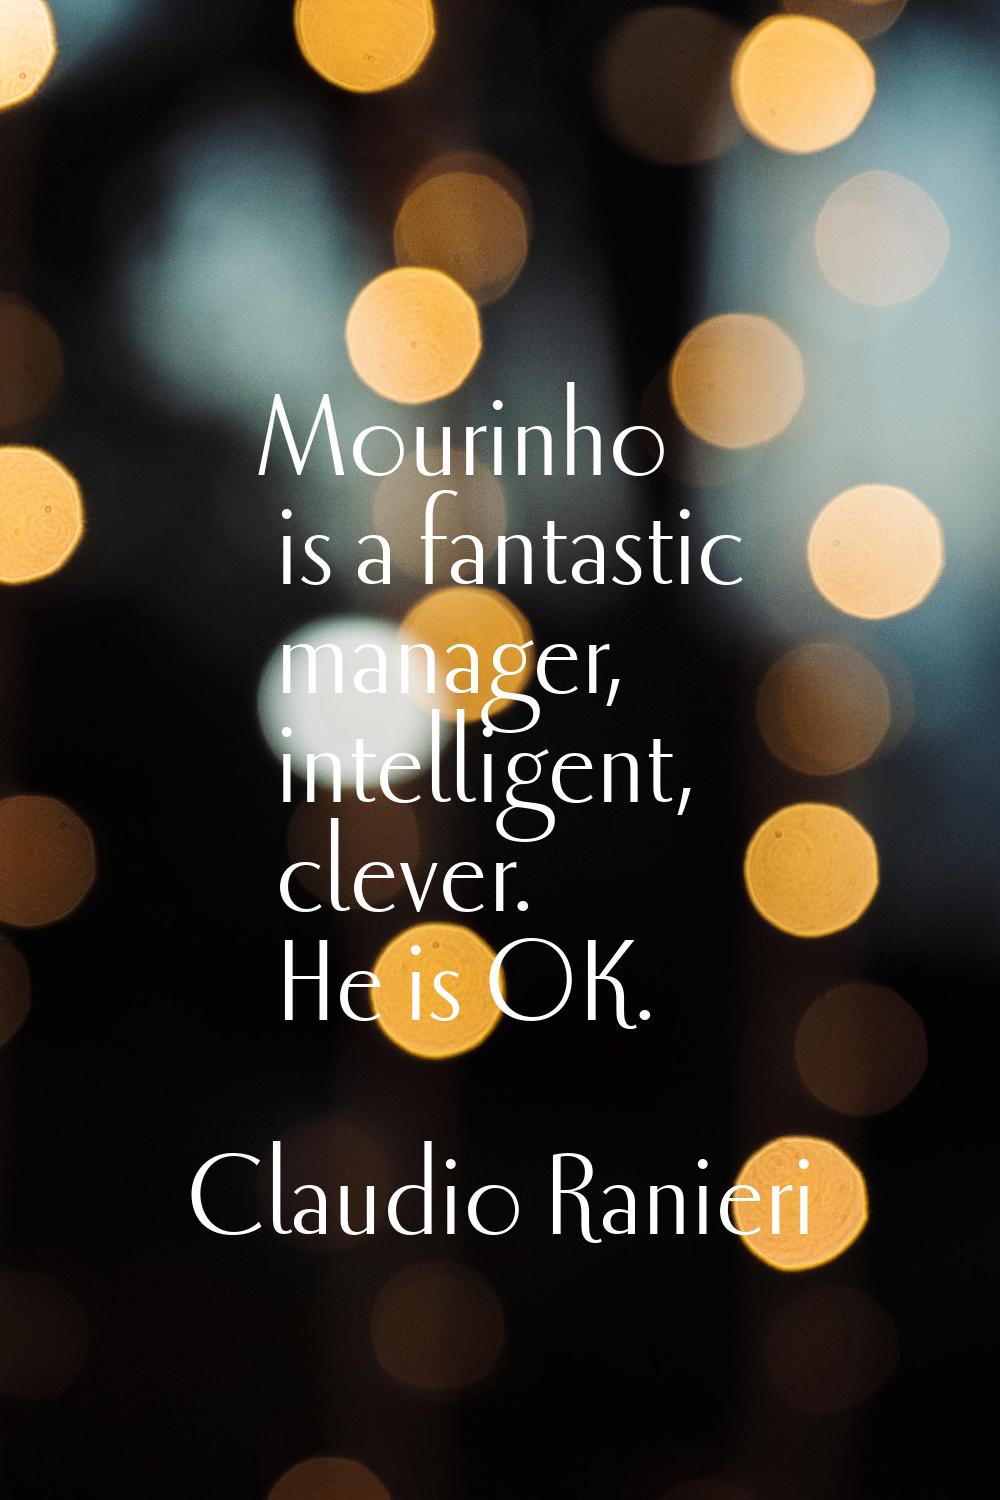 Mourinho is a fantastic manager, intelligent, clever. He is OK.